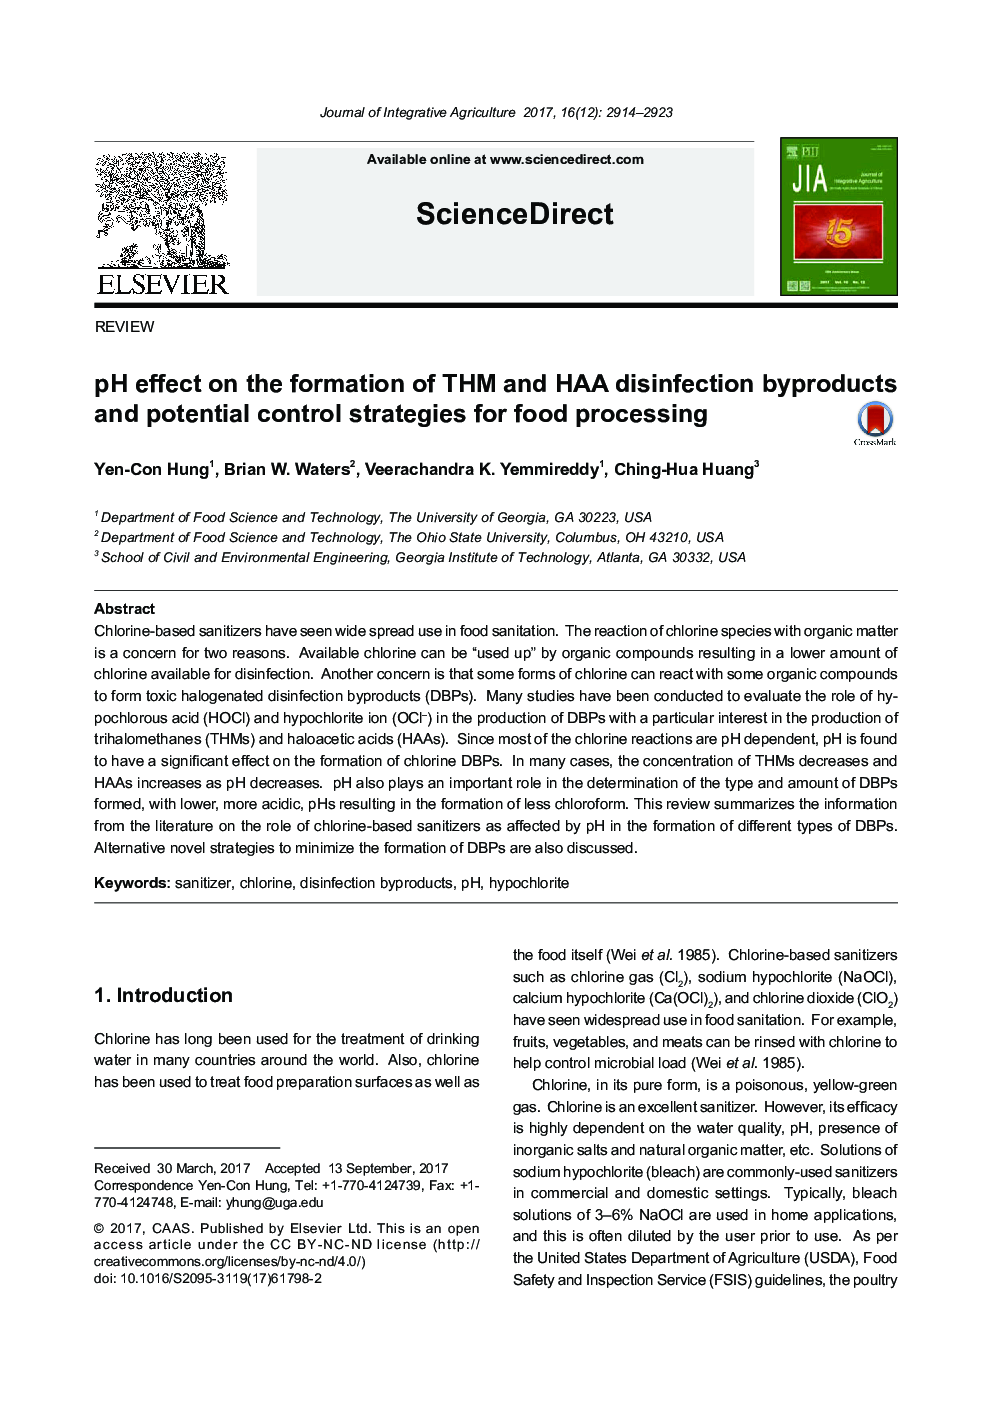 pH effect on the formation of THM and HAA disinfection byproducts and potential control strategies for food processing